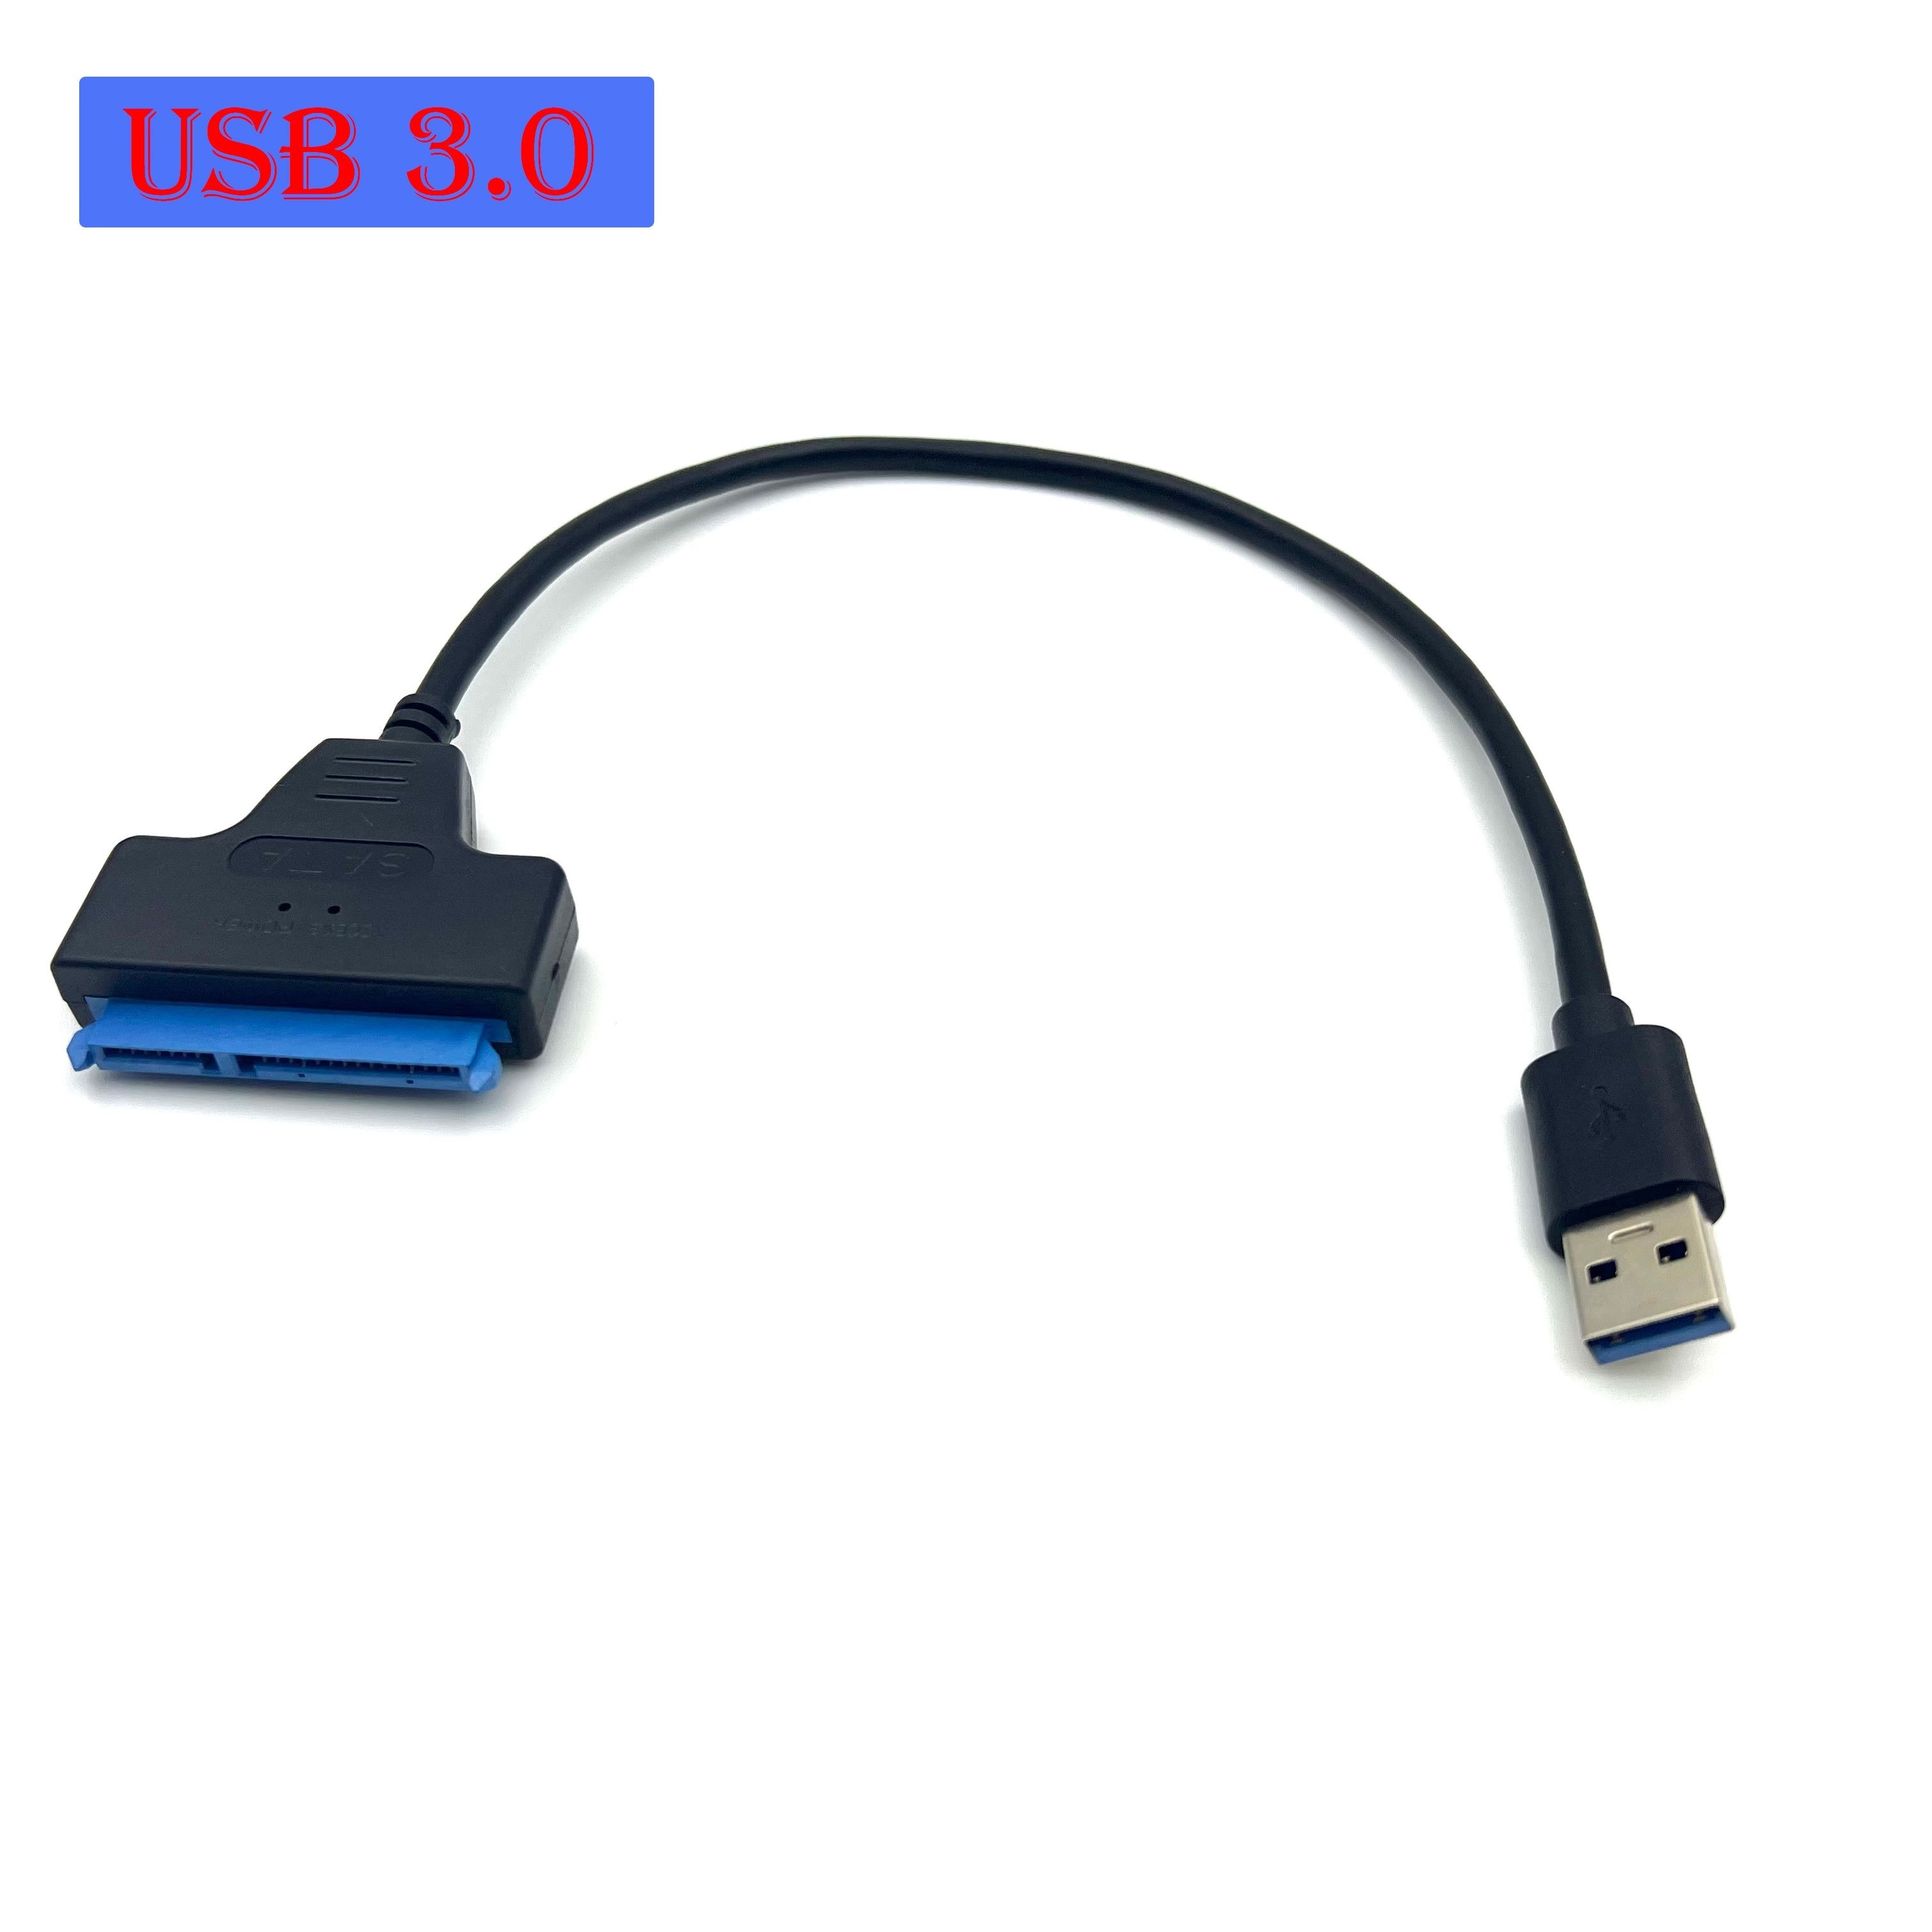 USB 3.0 2.0 SATA 3 Cable Sata To USB 3.0 Adapter Up To 6 Gbps Support 2.5  Inch External HDD SSD Hard Drive 22 Pin Sata III Cable - AliExpress